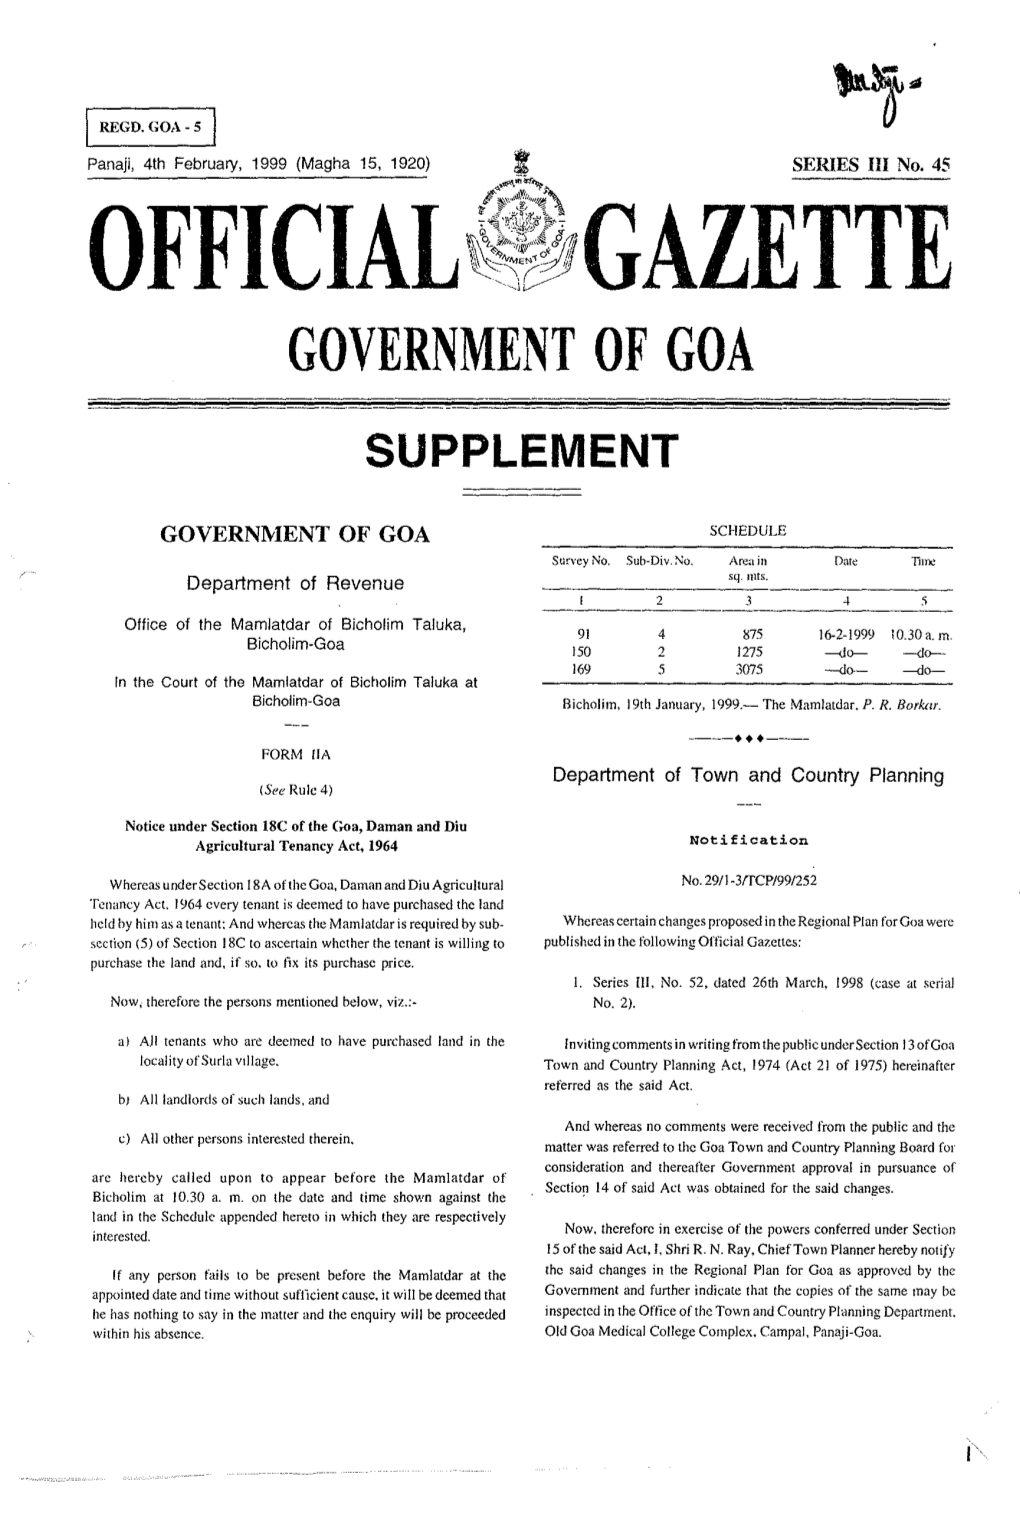 Official~Igazette Government of Goa Supplement